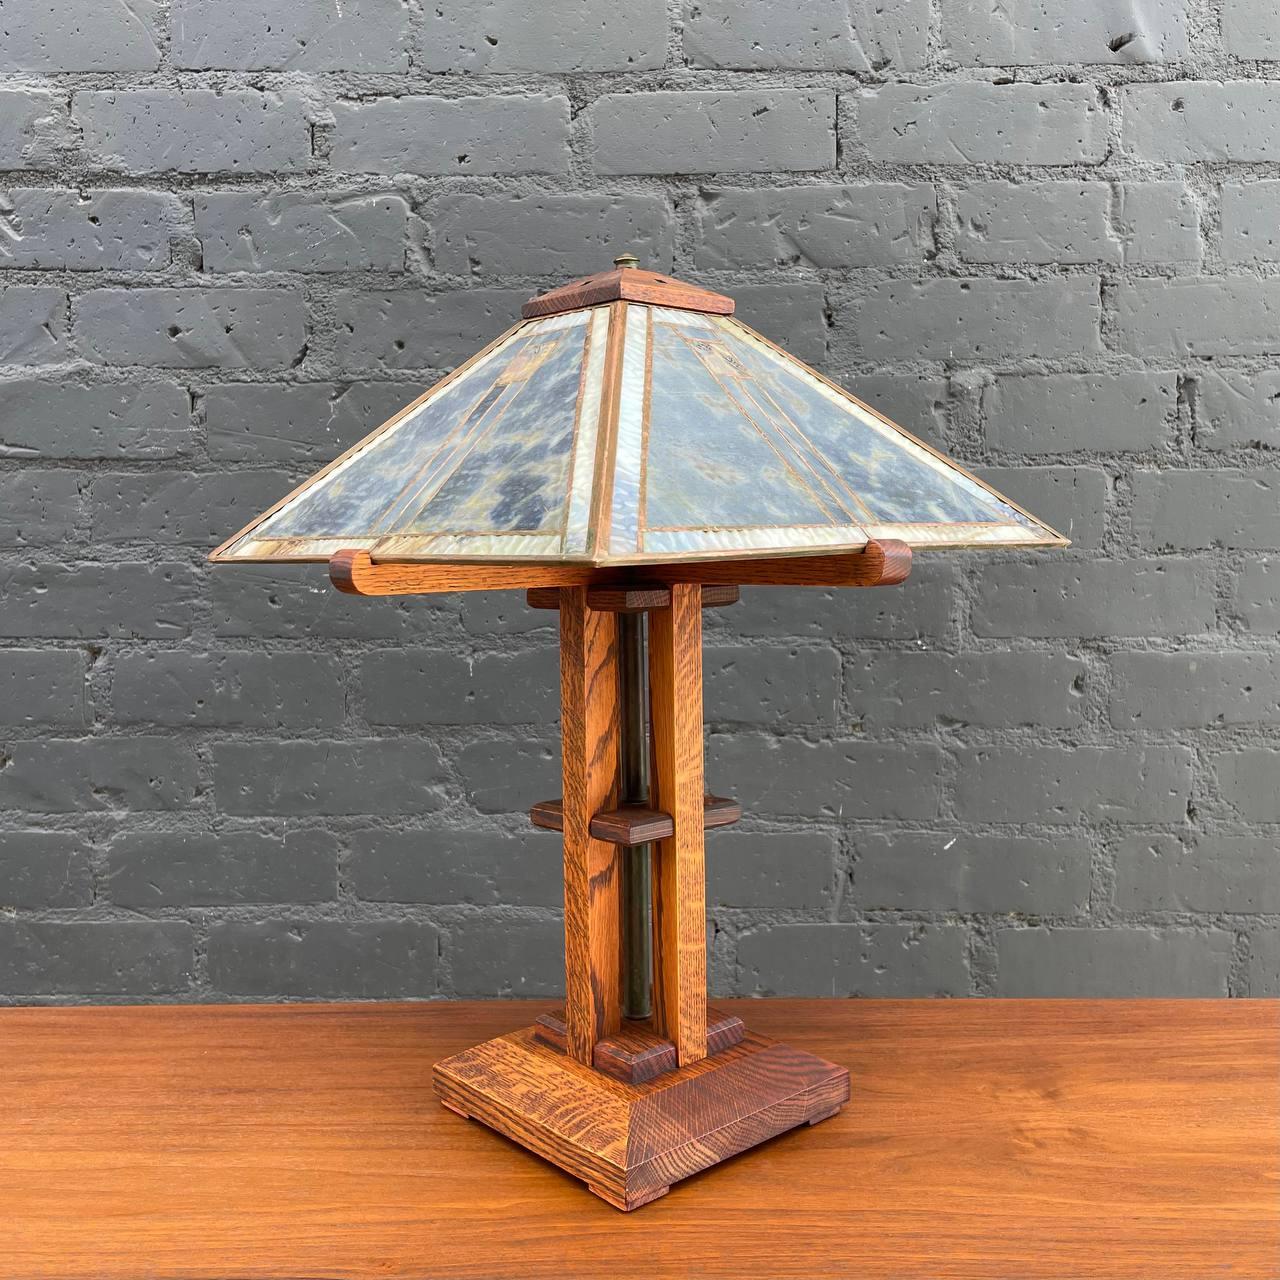 Antique Mission Oak & Slag Glass Table Lamp

Designer: Unknown
Country: United Stated
Manufacturer: Unknown
Materials: Oak Wood, Original Slag Glass Shade, Newly Rewired
Style: Arts & Crafts 
Year: 1940’s

$2,895 

Dimensions:
21”H x